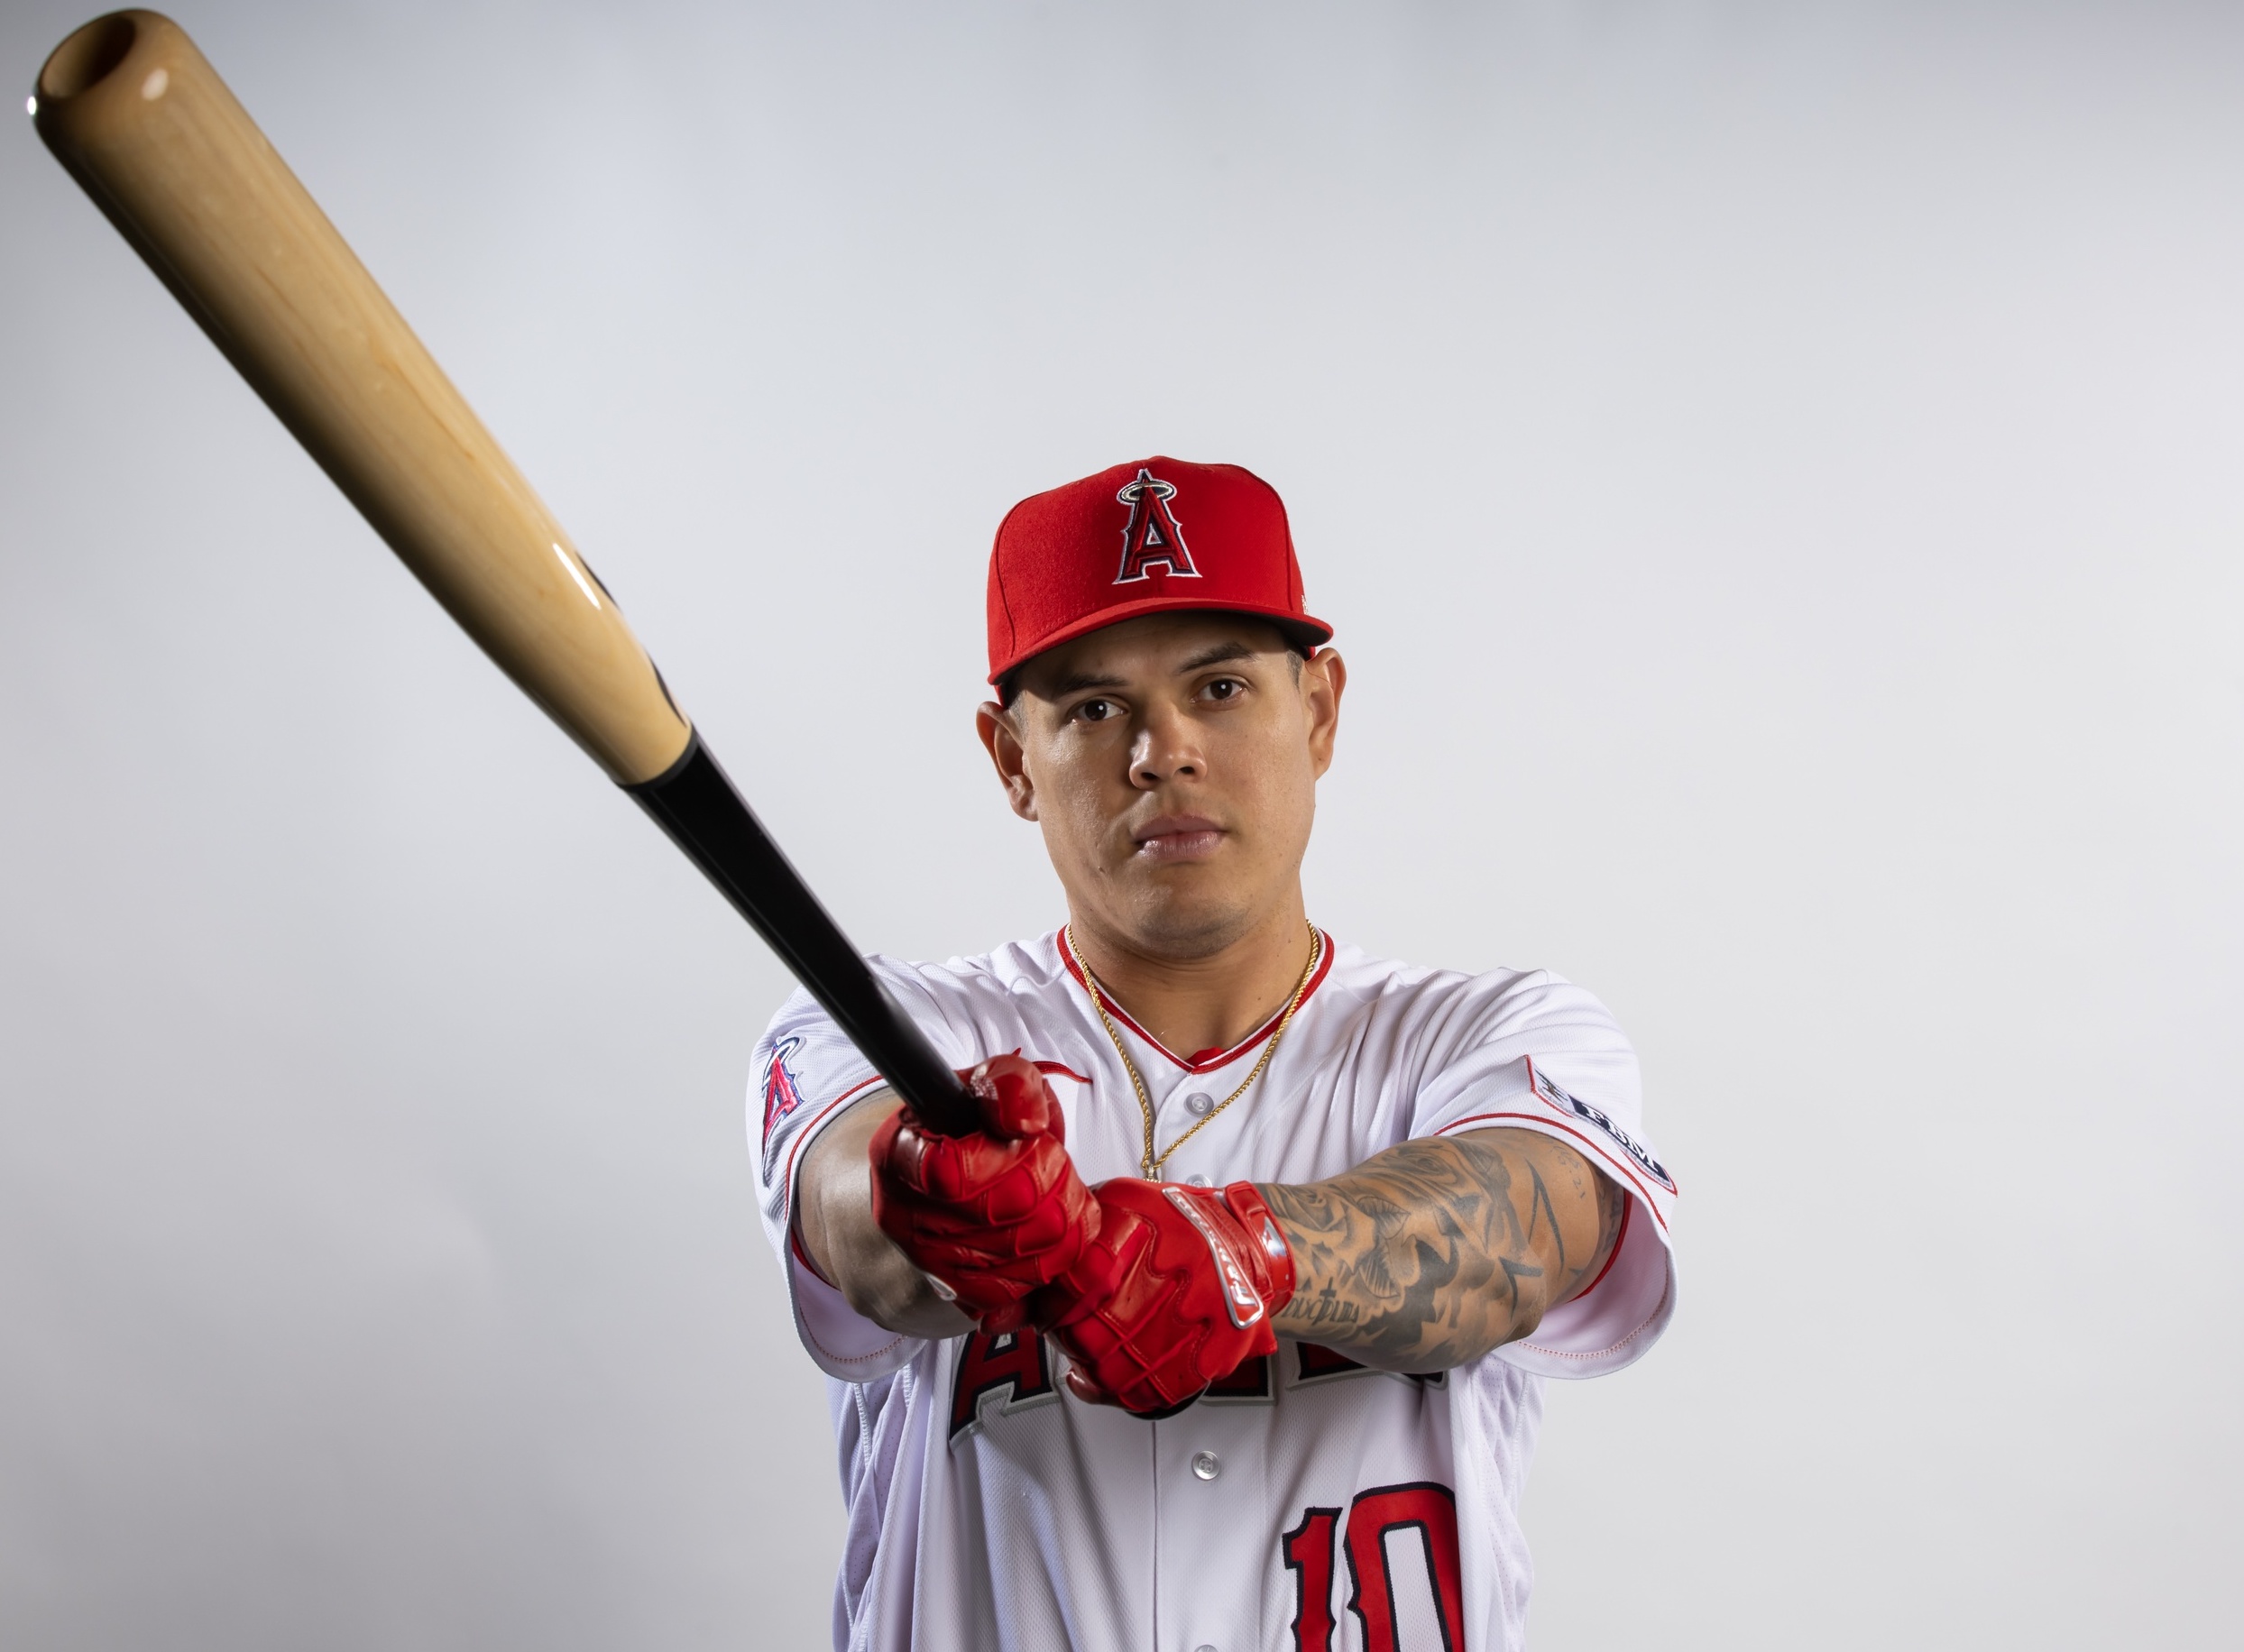 Gio Urshela is a new player for the Los Angeles Angels - AS USA